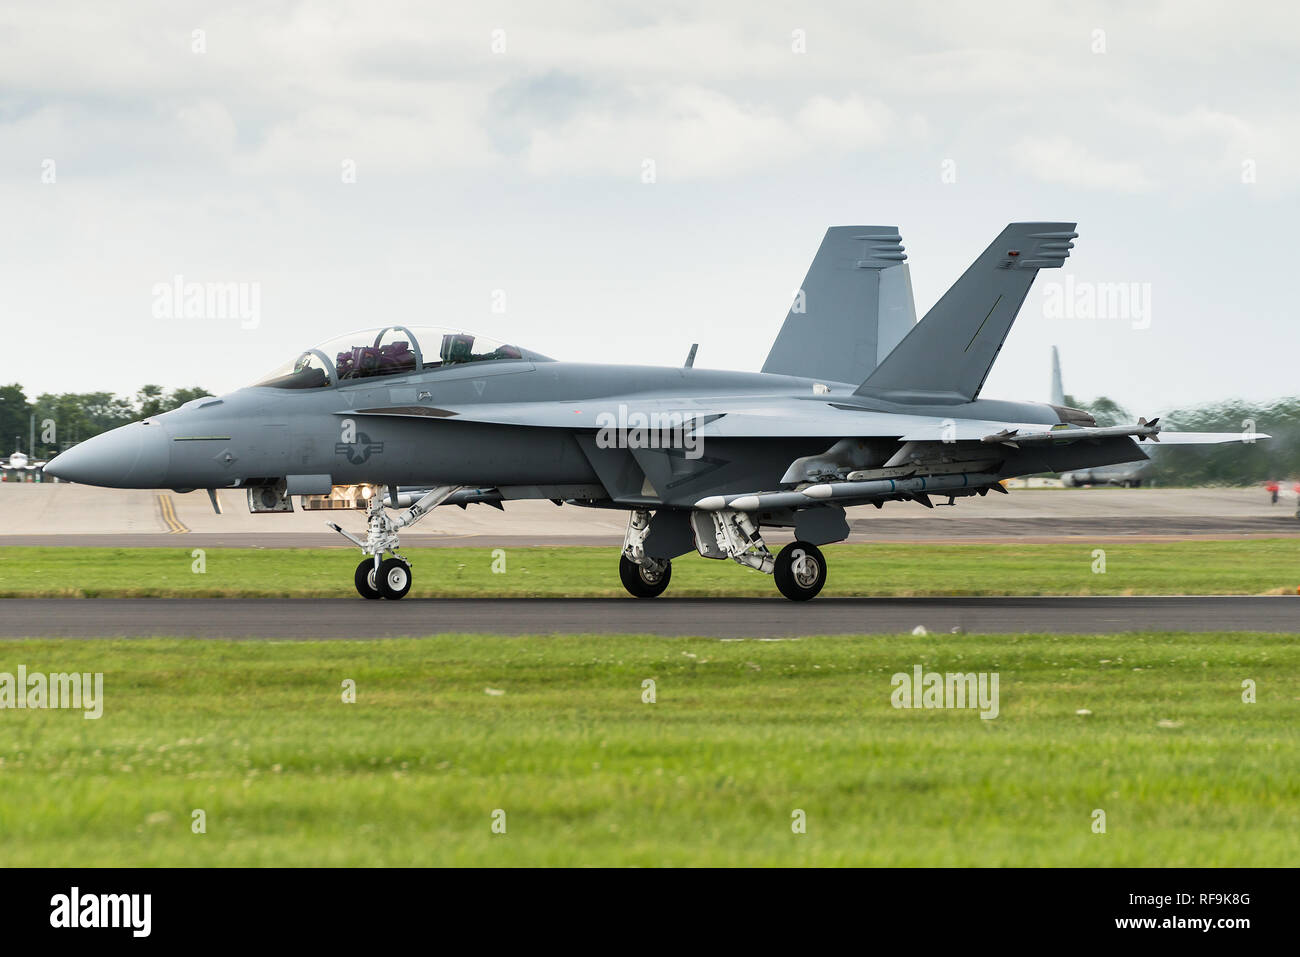 A Boeing F/A-18F Super Hornet multirole fighter jet of the United States Navy at the Royal International Air Tattoo 2016. Stock Photo